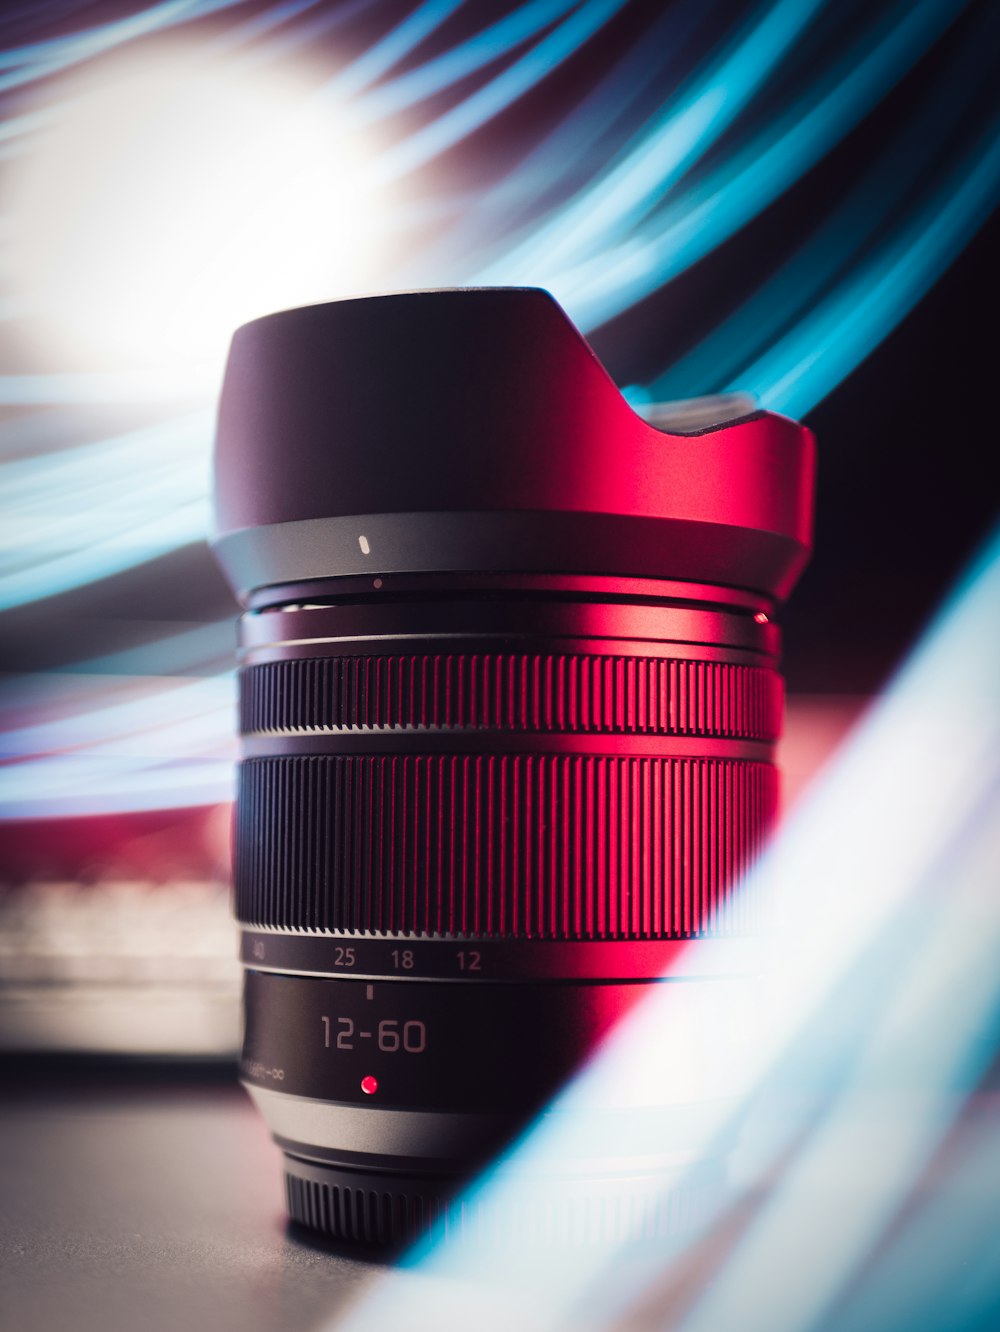 black camera lens on red and white textile